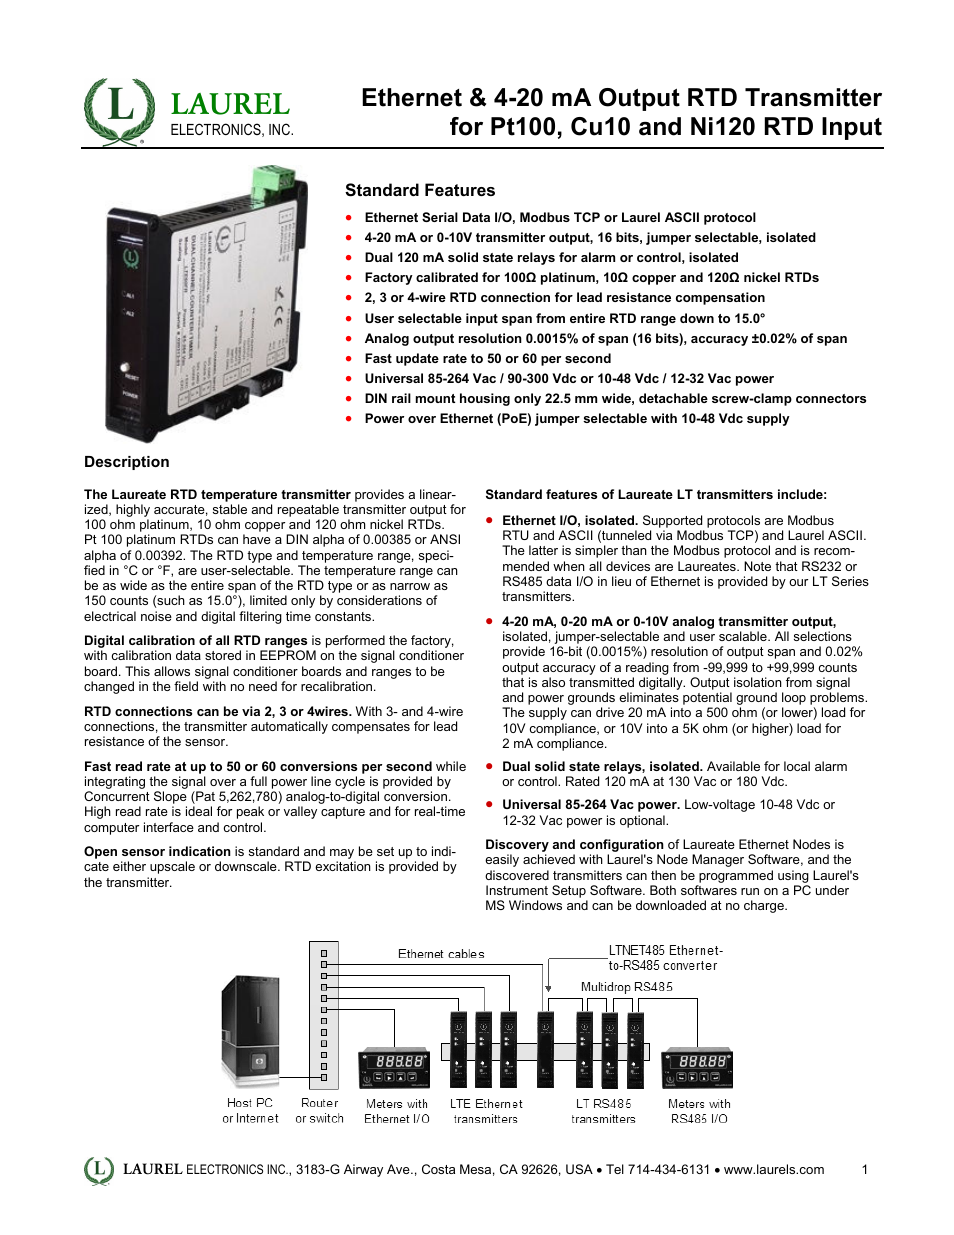 Laurel Electronics LTE: Ethernet & 4-20 mA Output RTD Transmitter for Pt100, Cu10 and Ni120 RTD Input User Manual | 4 pages